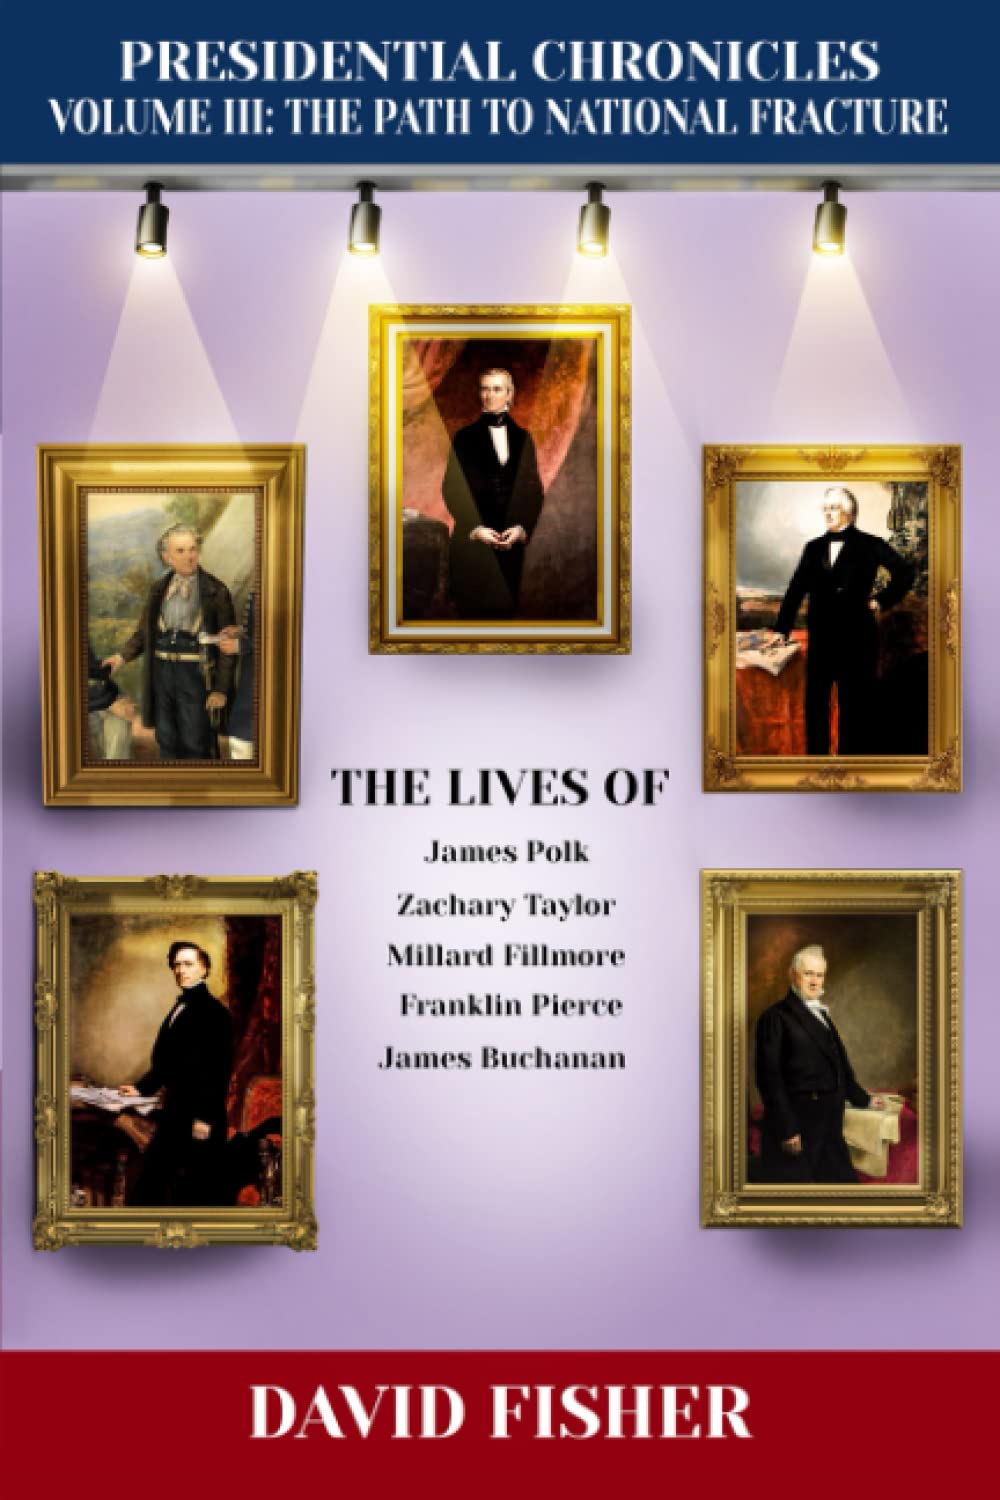 Presidential Chronicles Volume III: The Path to National Fracture: The Lives of James Polk, Zachary Taylor, Millard Fillmore, Franklin Pierce, and James Buchanan